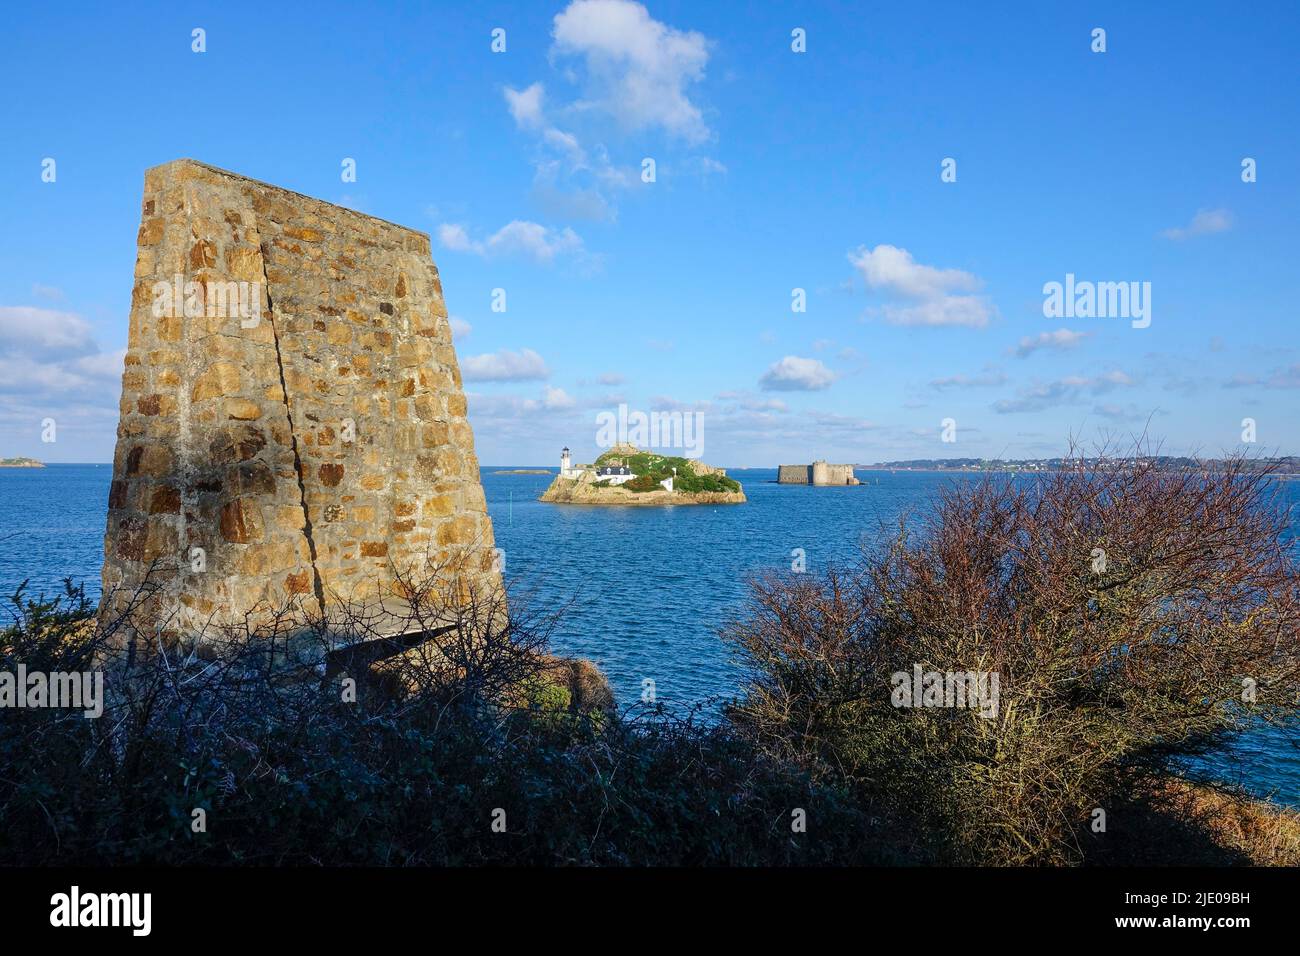 View from the Pointe de Penn al Lann in Carantec to the island Ile Louet with lighthouse and the fortress island Chateau du Taureau at the entrance Stock Photo